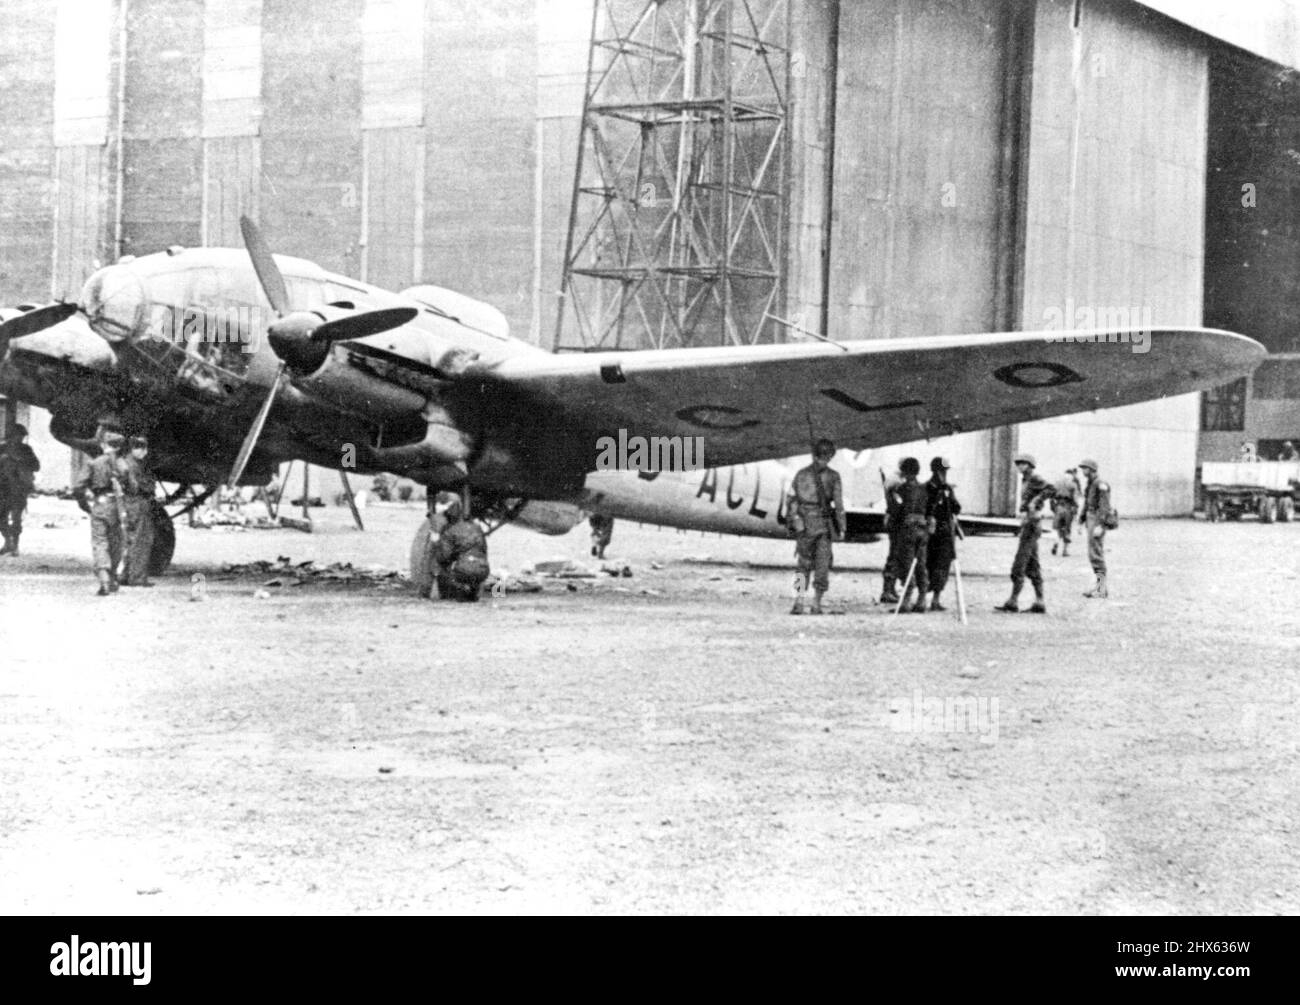 German Bomber Captured Intact. American soldiers are shown examining a German Heinkel H-3 bomber which was taken intact in the capture of an airport in North Africa. April 13, 1943. (Photo by ACME Photo). Stock Photo